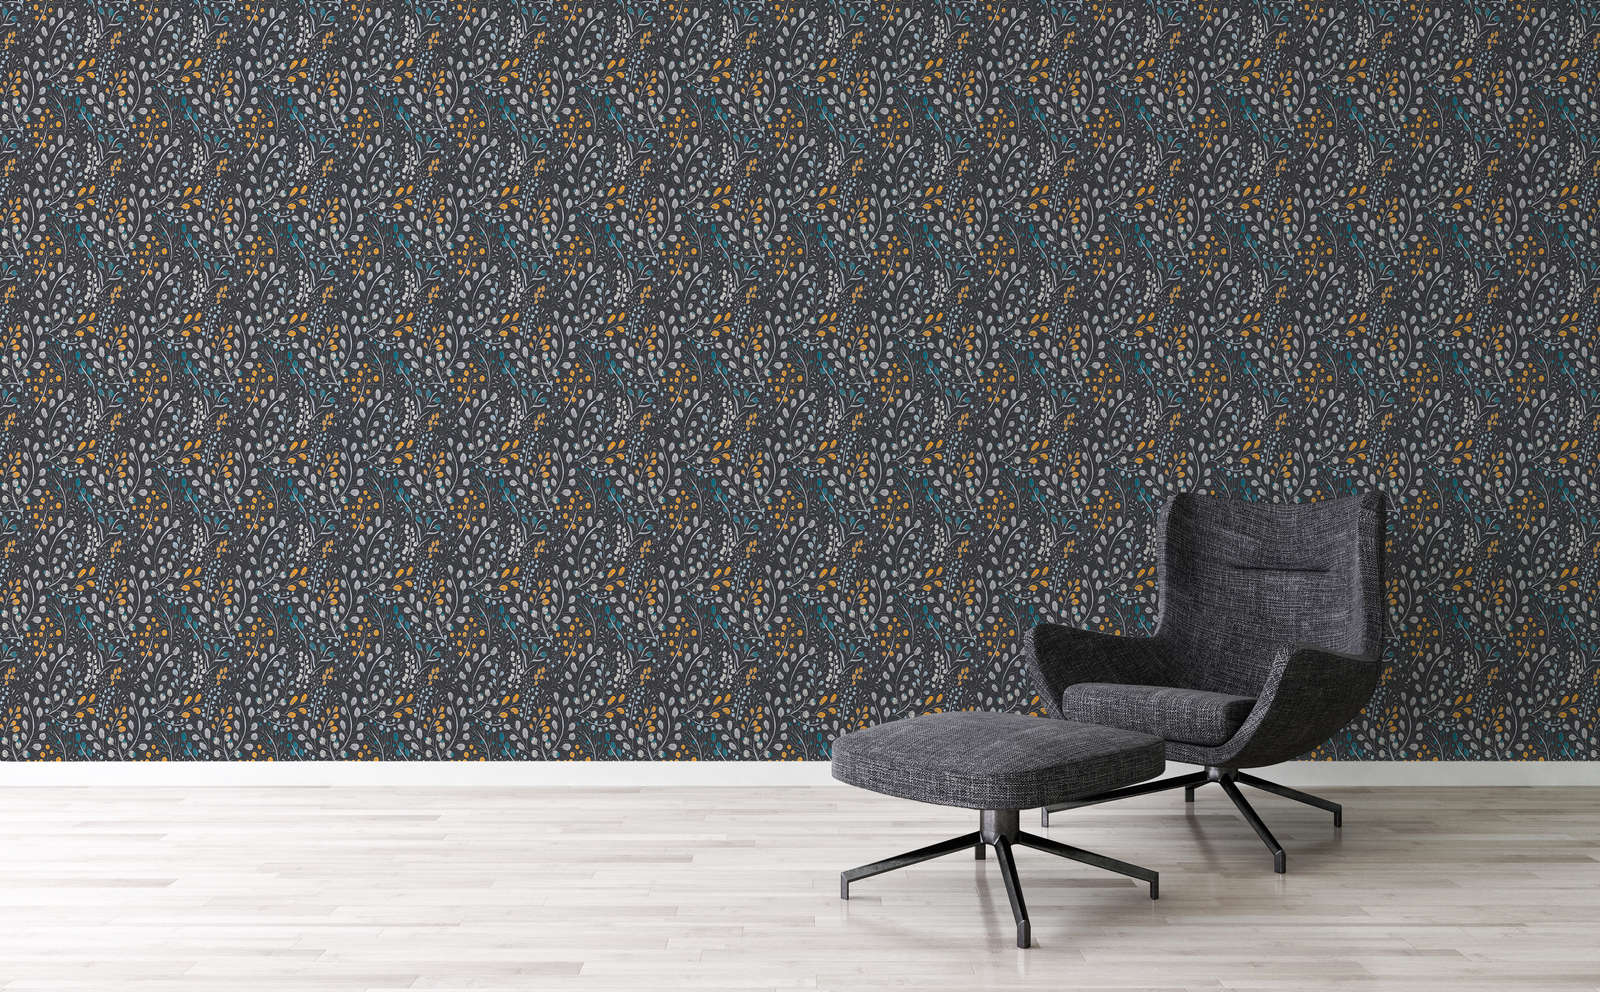             Wallpaper with floral & abstract pattern matt - black, yellow, blue
        